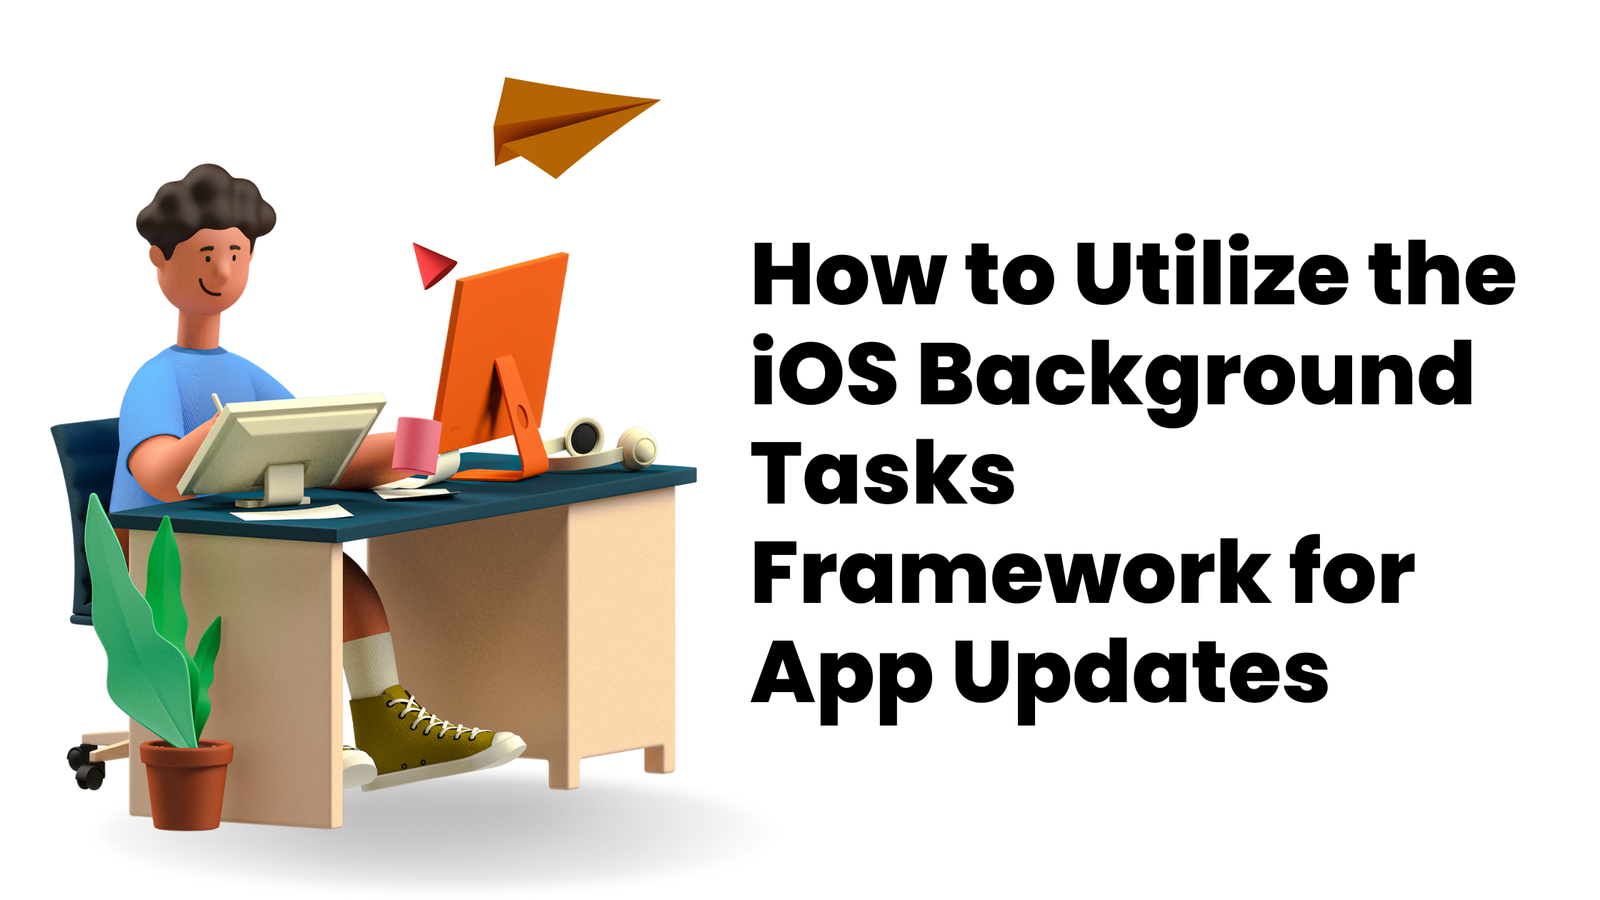 How to Utilize the iOS Background Tasks Framework for Automated App Updates